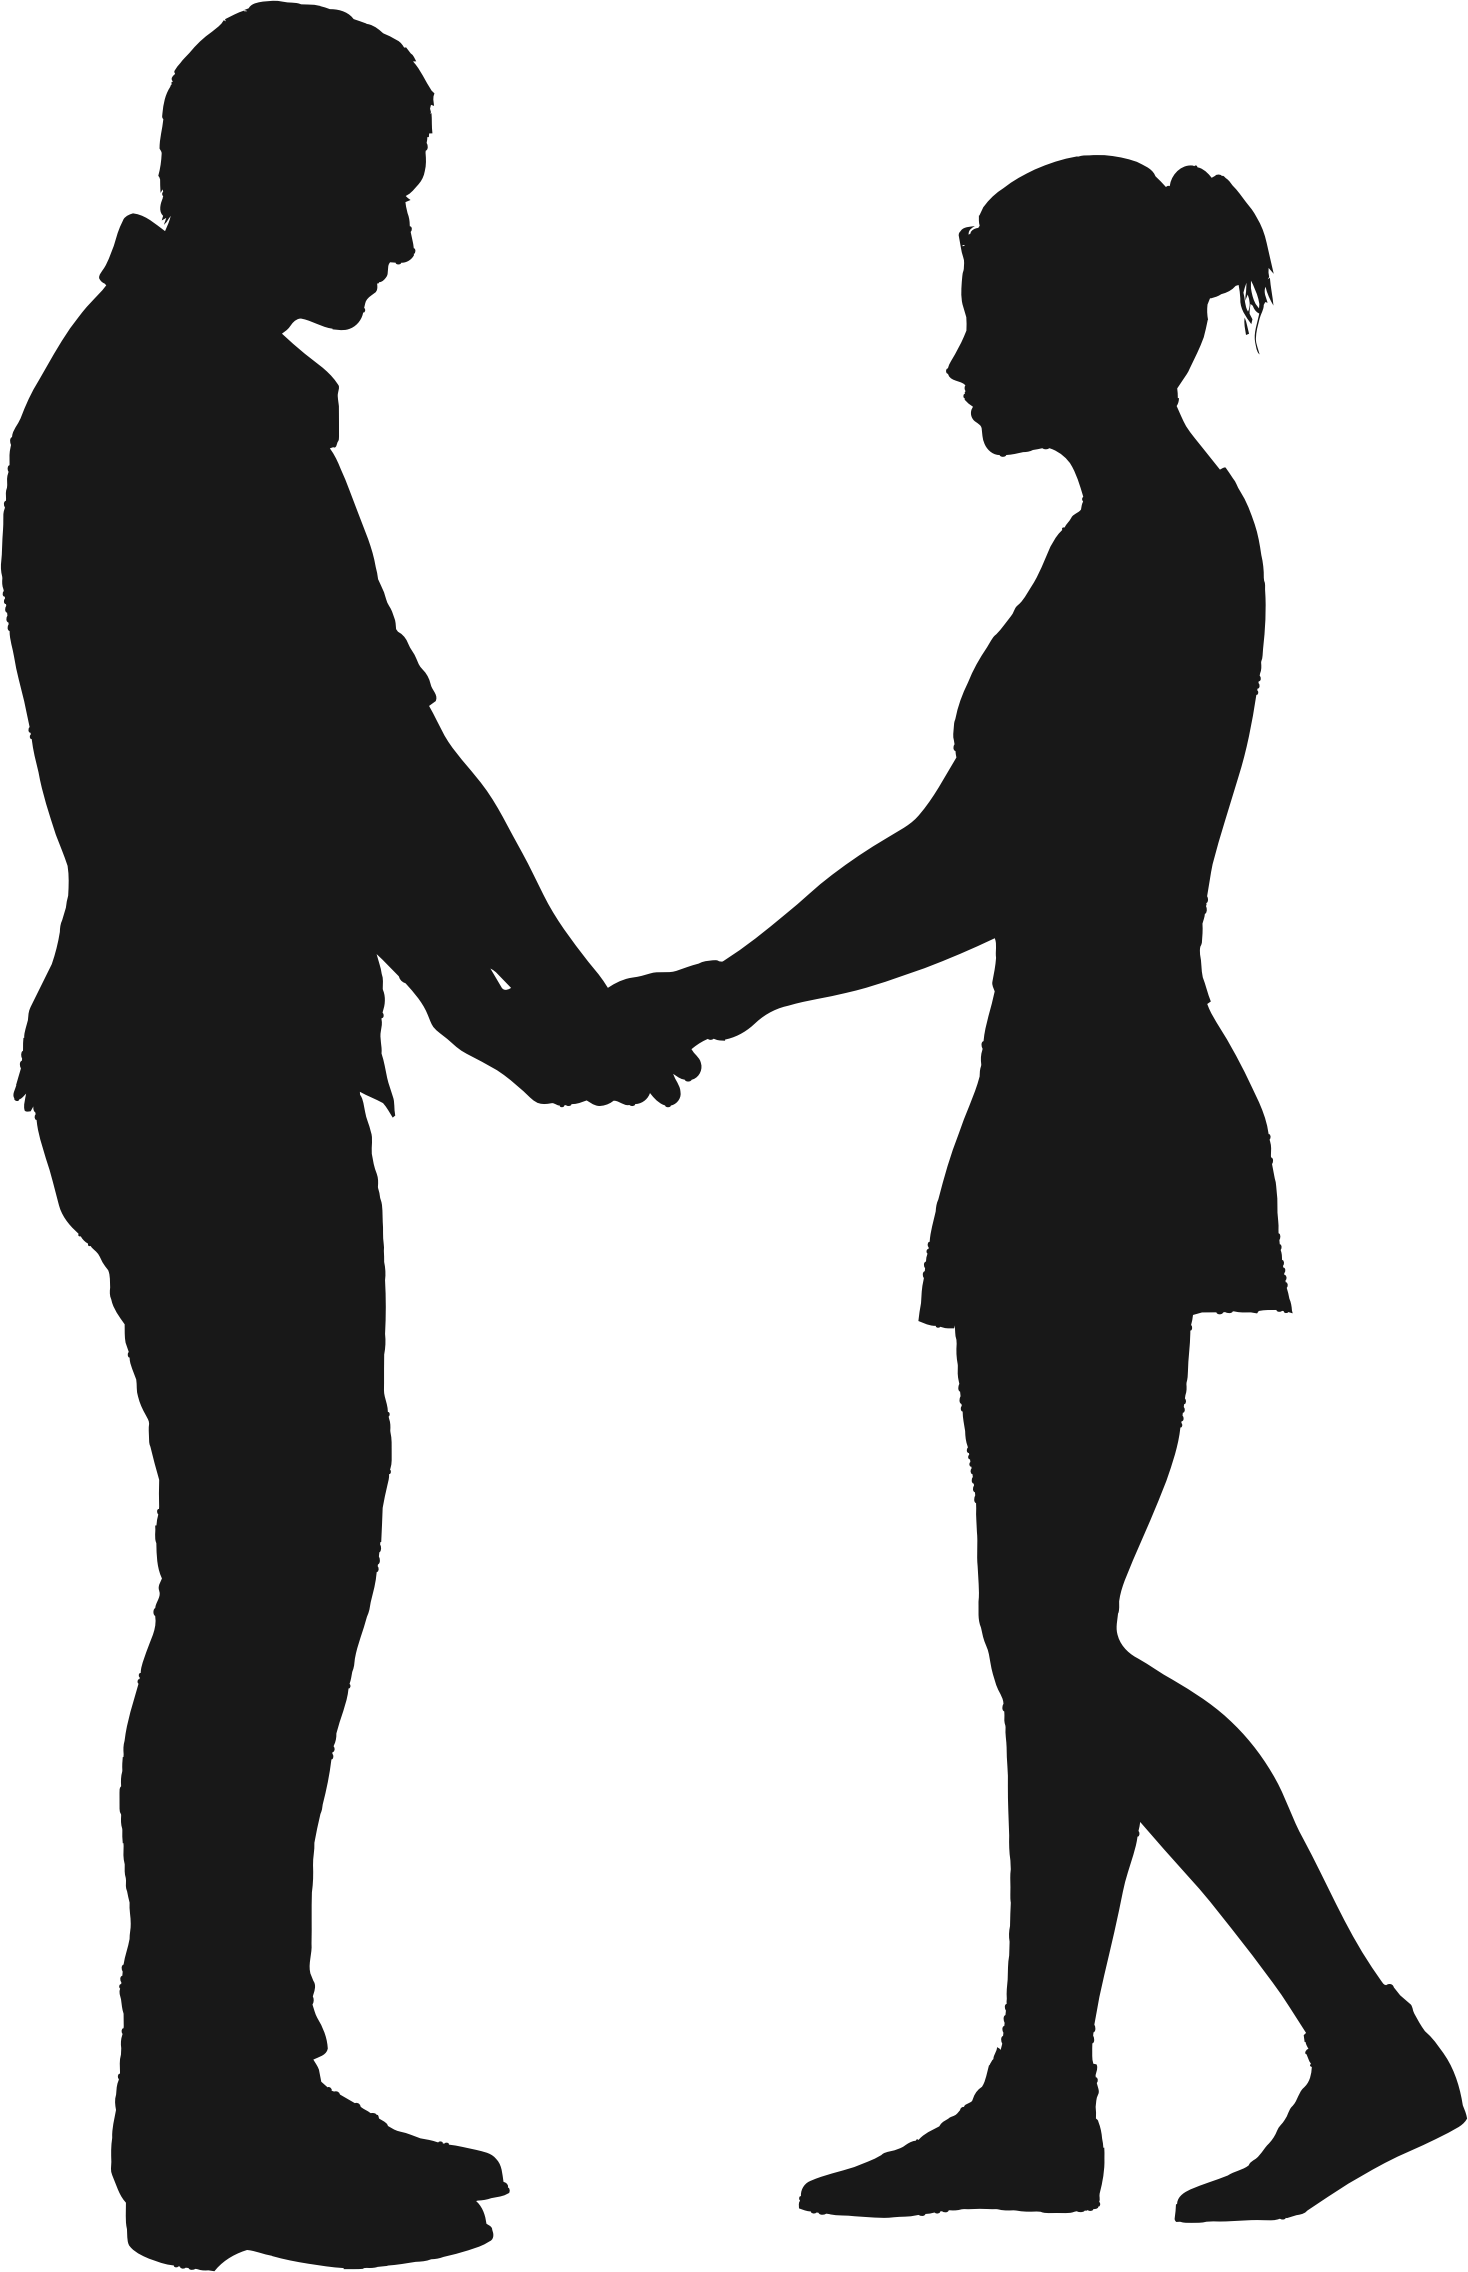 Couples Silhouette Clip Art 13 - Boy And Girl Holding Hands Silhouette (1468x2272)